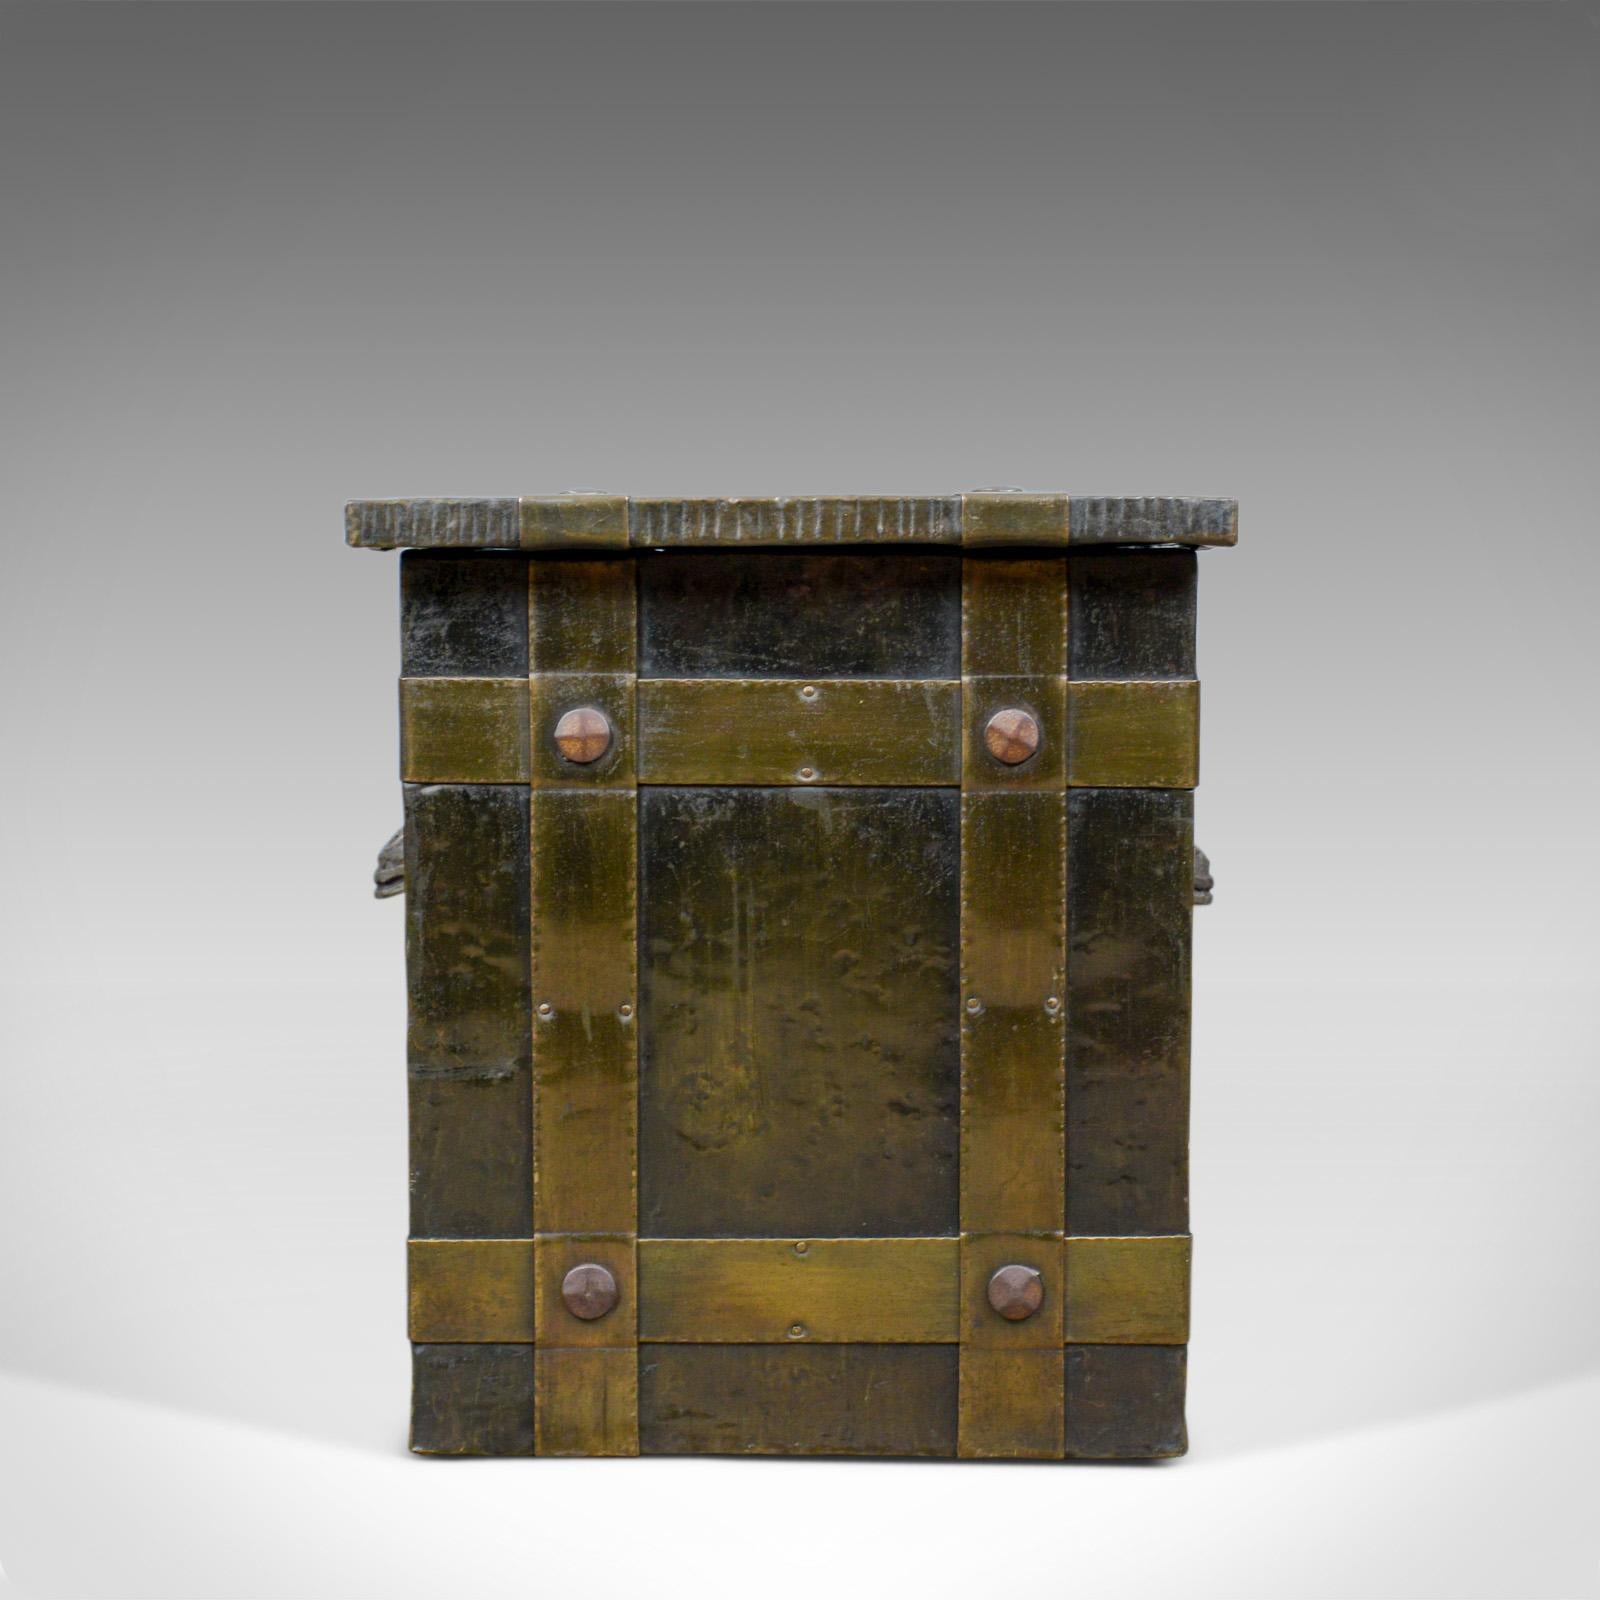 This is an antique log bin. An Edwardian, bound metal, fireside box with Arts & Crafts overtones dating to the early 20th century, circa 1910.

A pleasing mid-size fireside storage bin 
Presented in good antique condition

Arts & Crafts